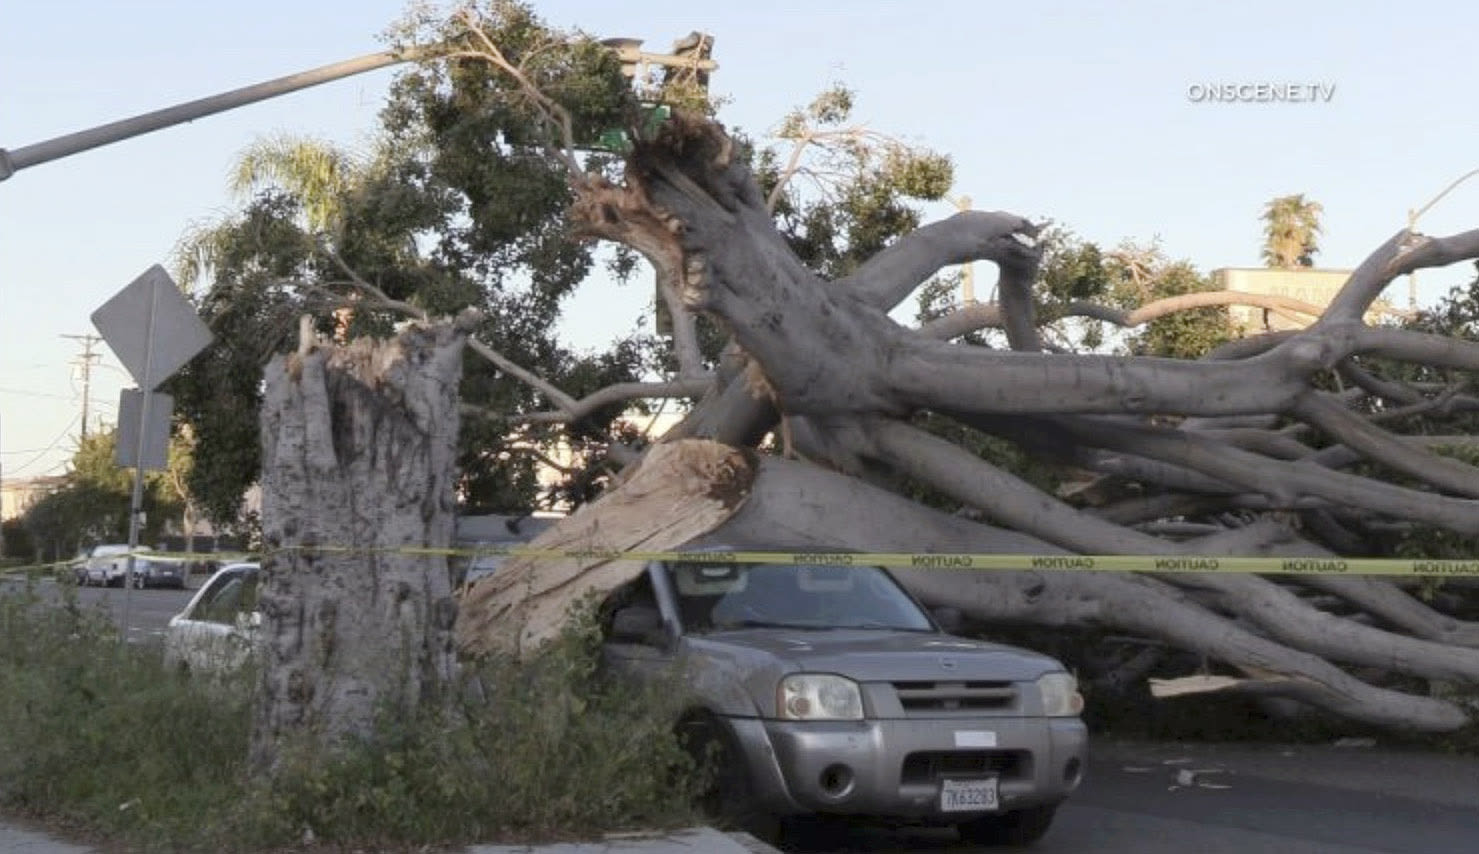 Toppled scaffolding, canceled beach festival, brush fires: Strong winds stir trouble for SoCal